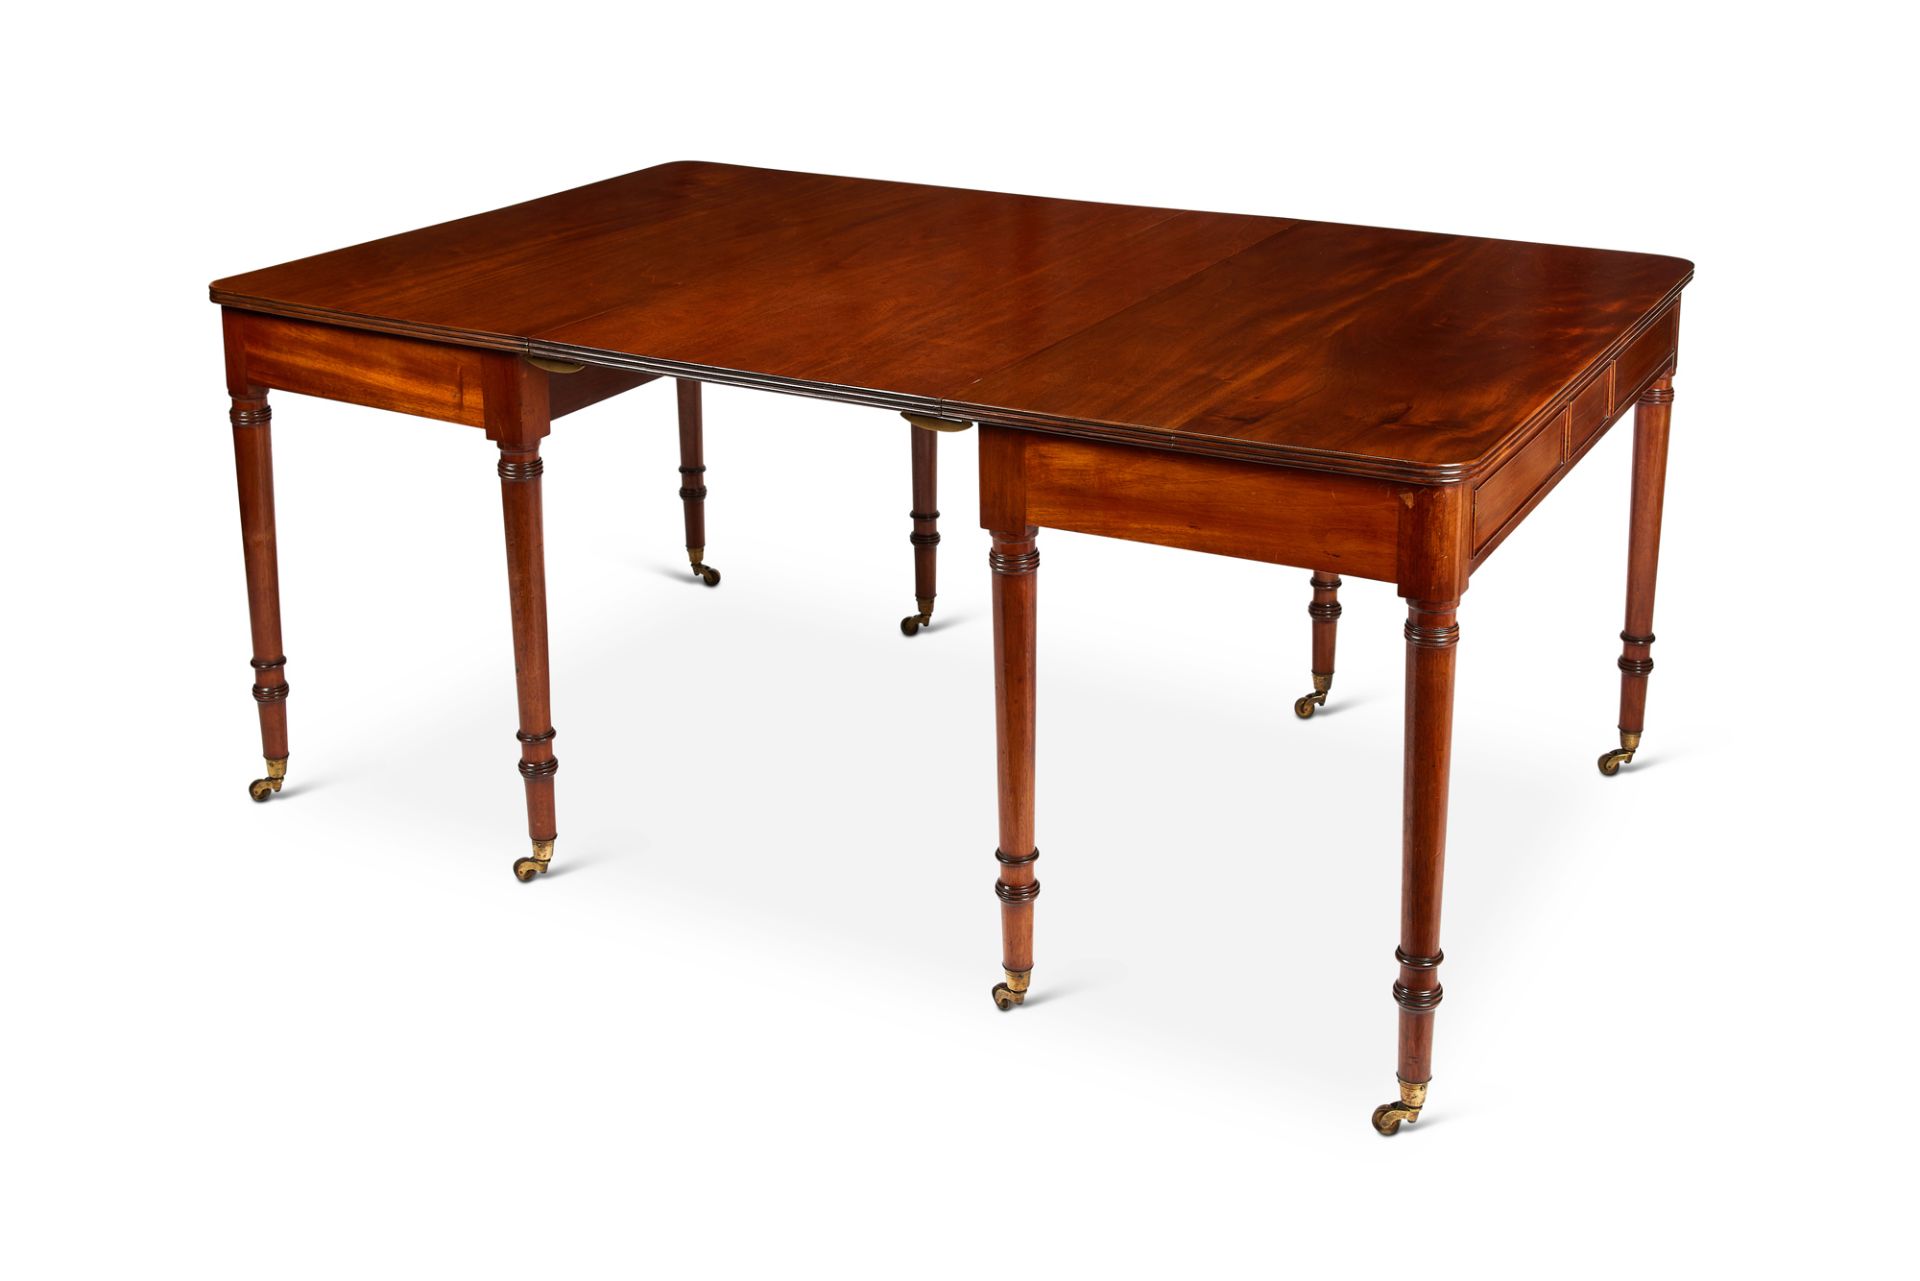 A late George III style mahogany dining table